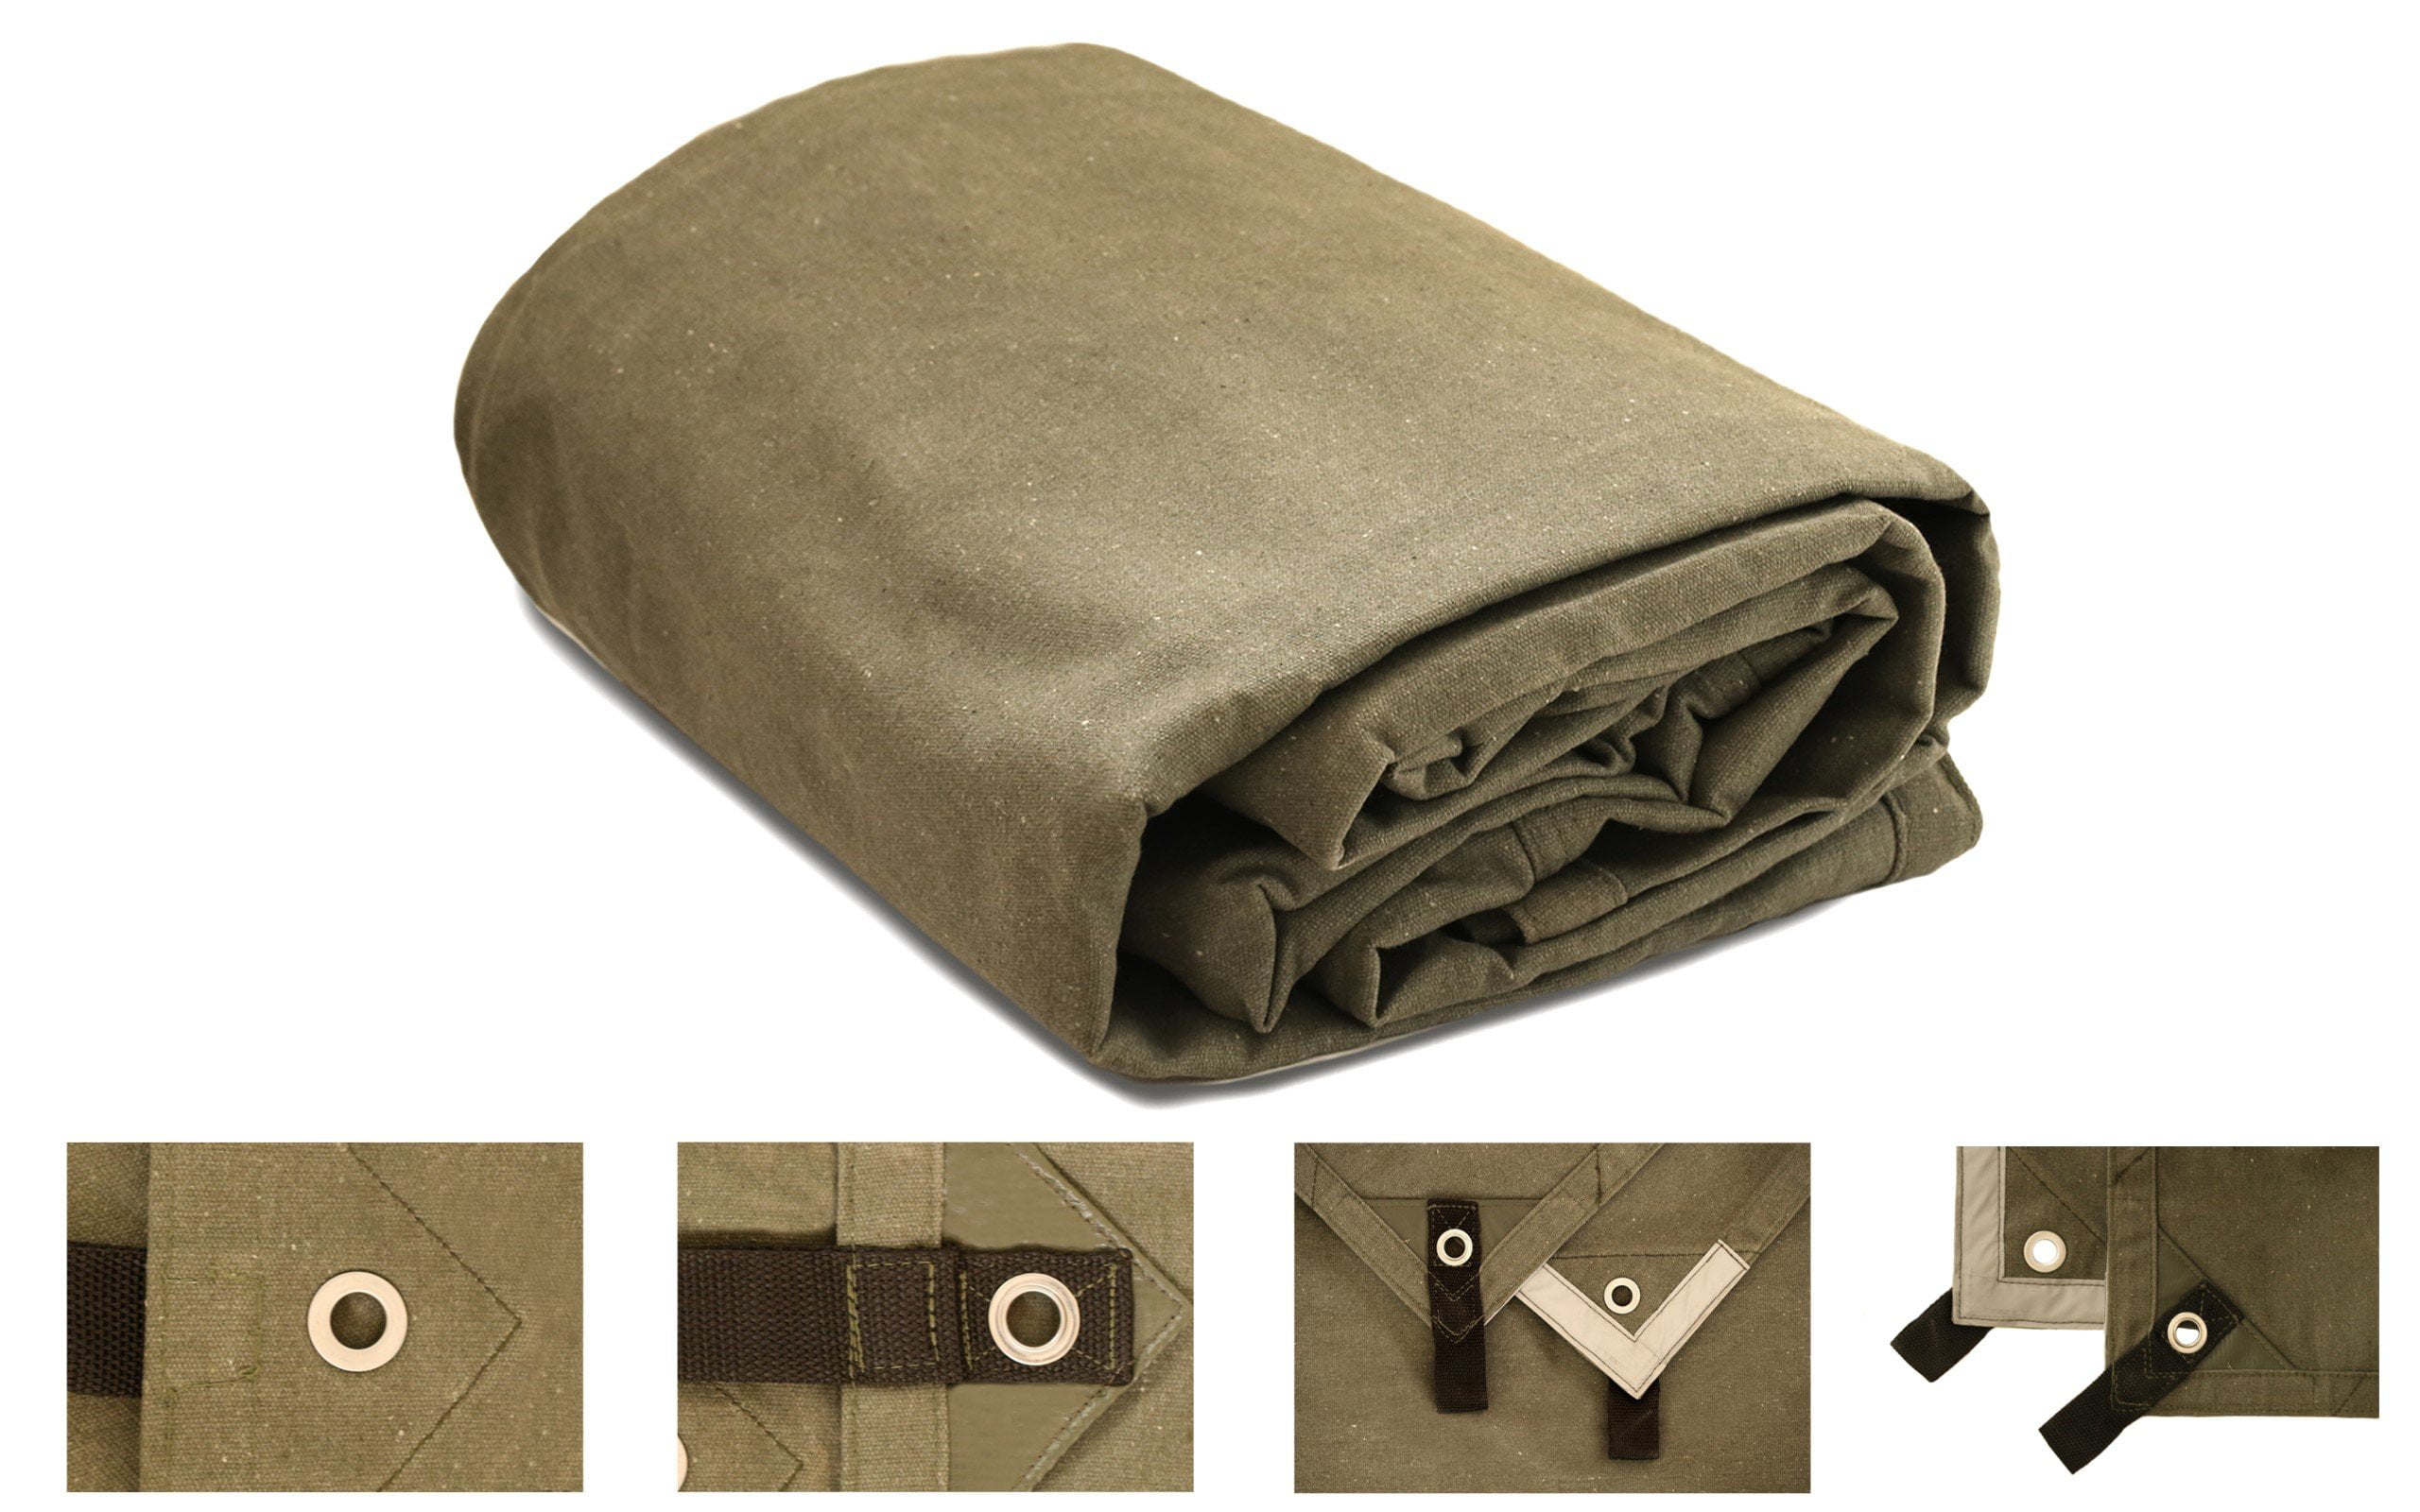 Heavy Duty Waterproof UV Resistant Cut Size: 12x24, Finished Size: 11’6 x23’6”, Brown Industrial & Commercial Use Cloth Tarp WHITEDUCK Canvas Tarp 18 oz Rustproof Grommets